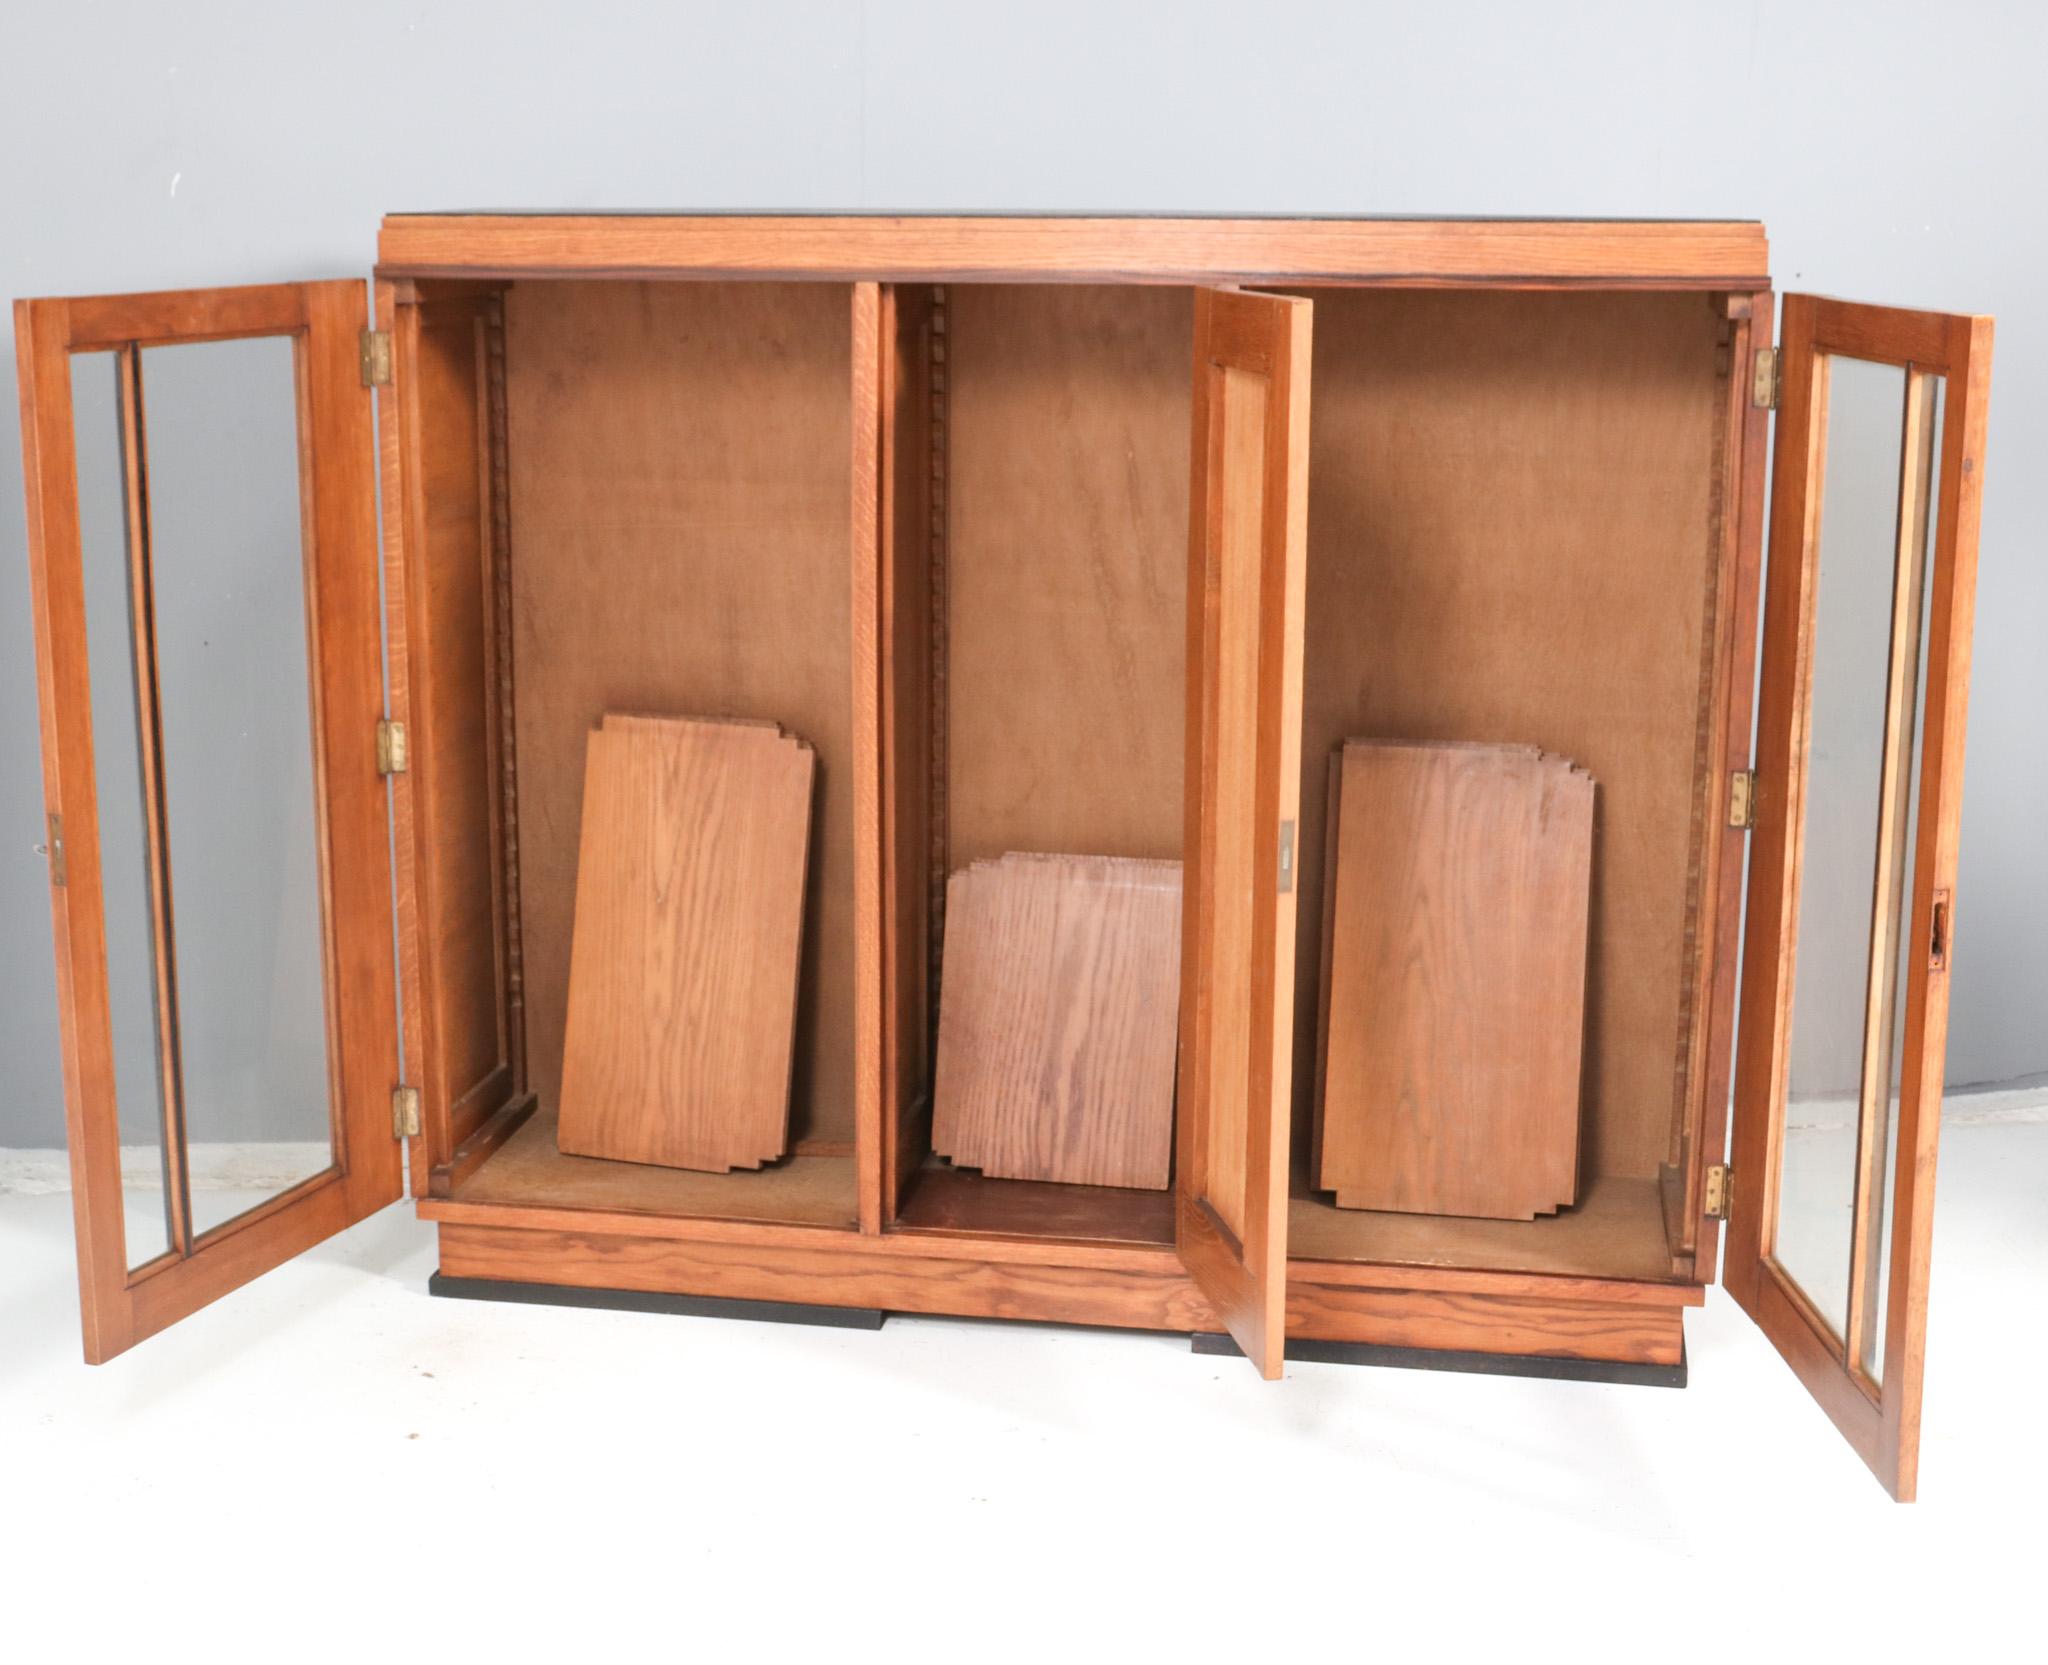 Stunning and rare Art Deco Modernist three-door bookcase.
Striking Dutch design from the 1920s.
Solid oak base with original veneered black lacquered top.
Nine original solid oak shelves, adjustable in height.
In very good original condition with